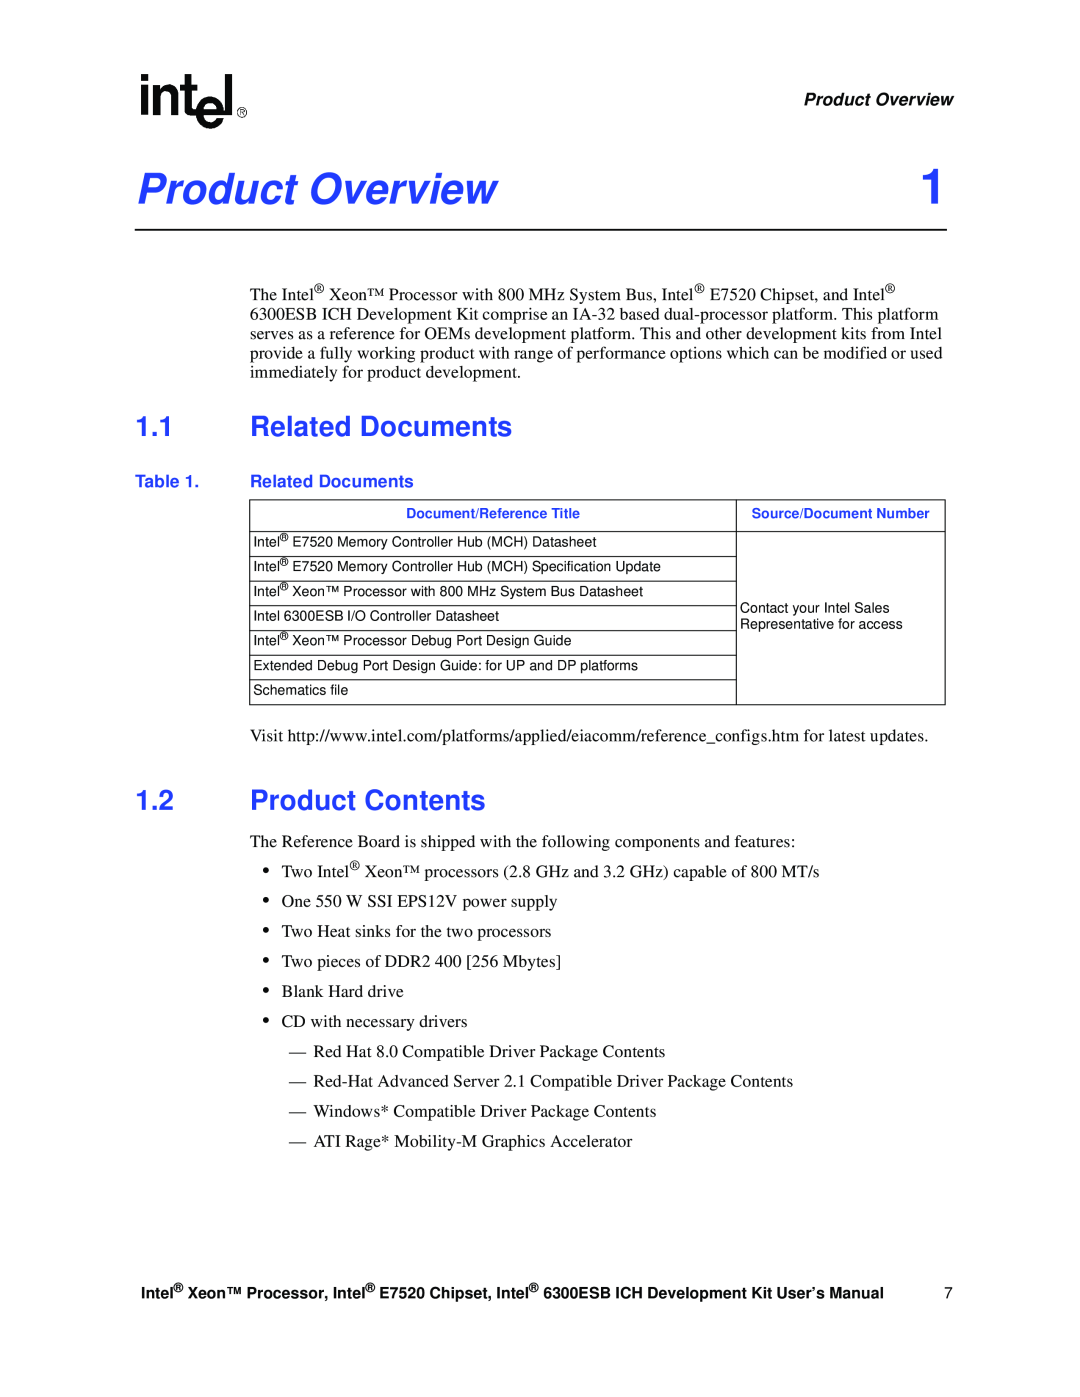 Intel 6300ESB ICH, Xeon user manual Product Overview, Related Documents, Product Contents 